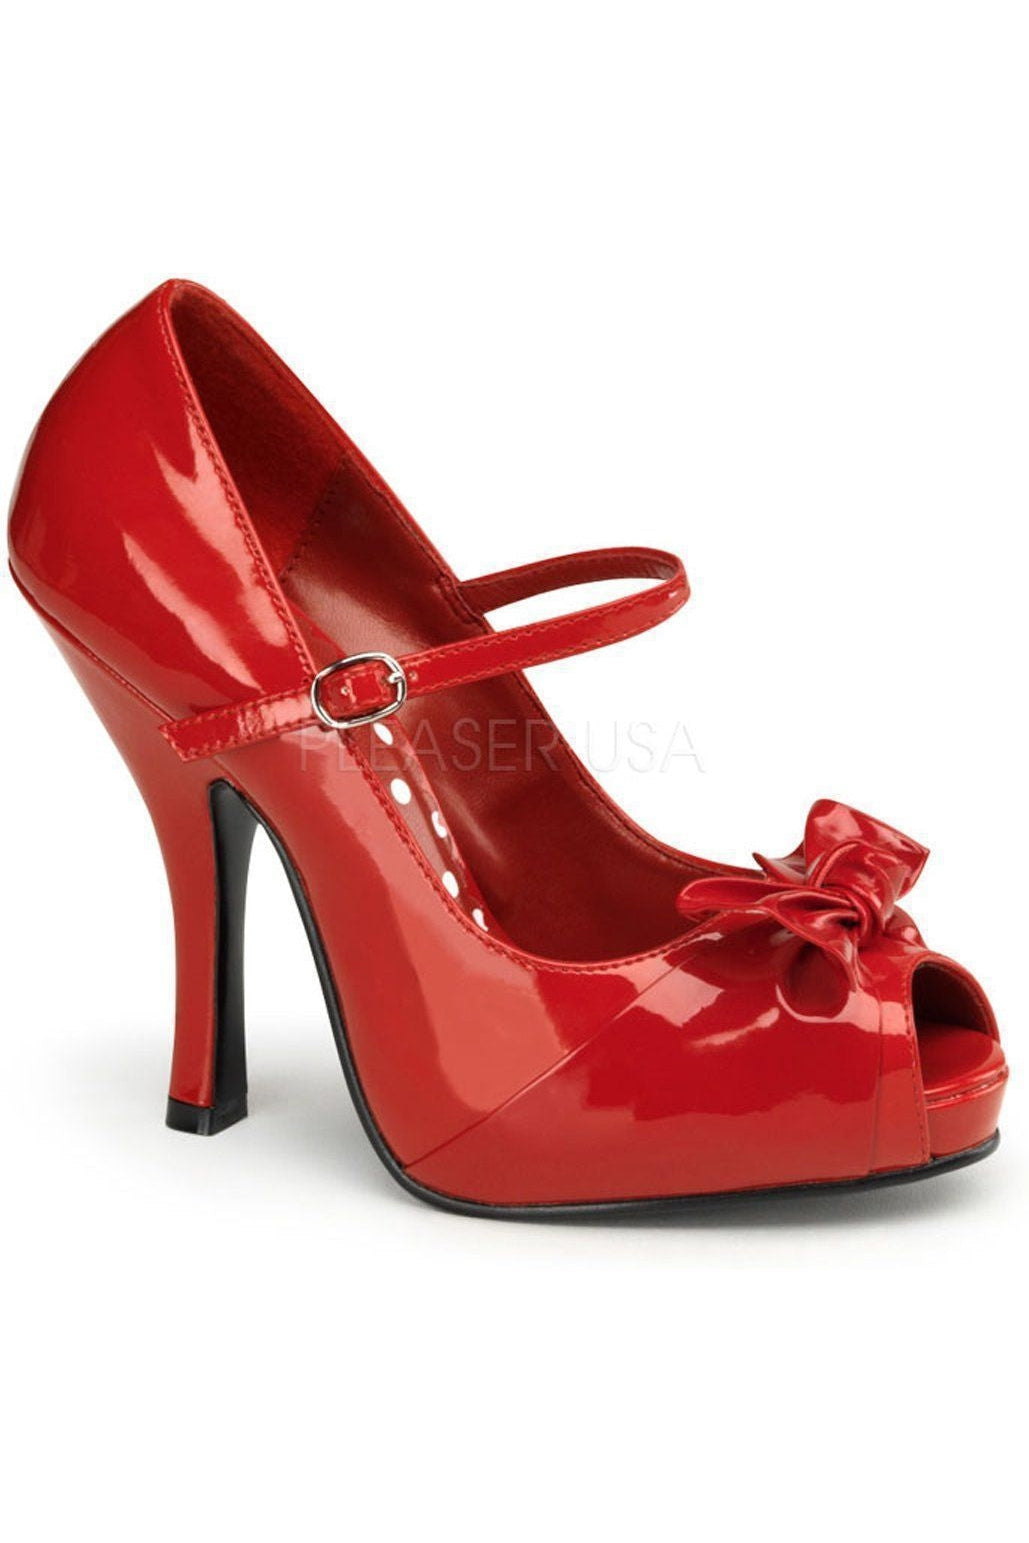 CUTIEPIE-08 Pump | Red Faux Leather-Pin Up Couture-Red-Mary Janes-SEXYSHOES.COM